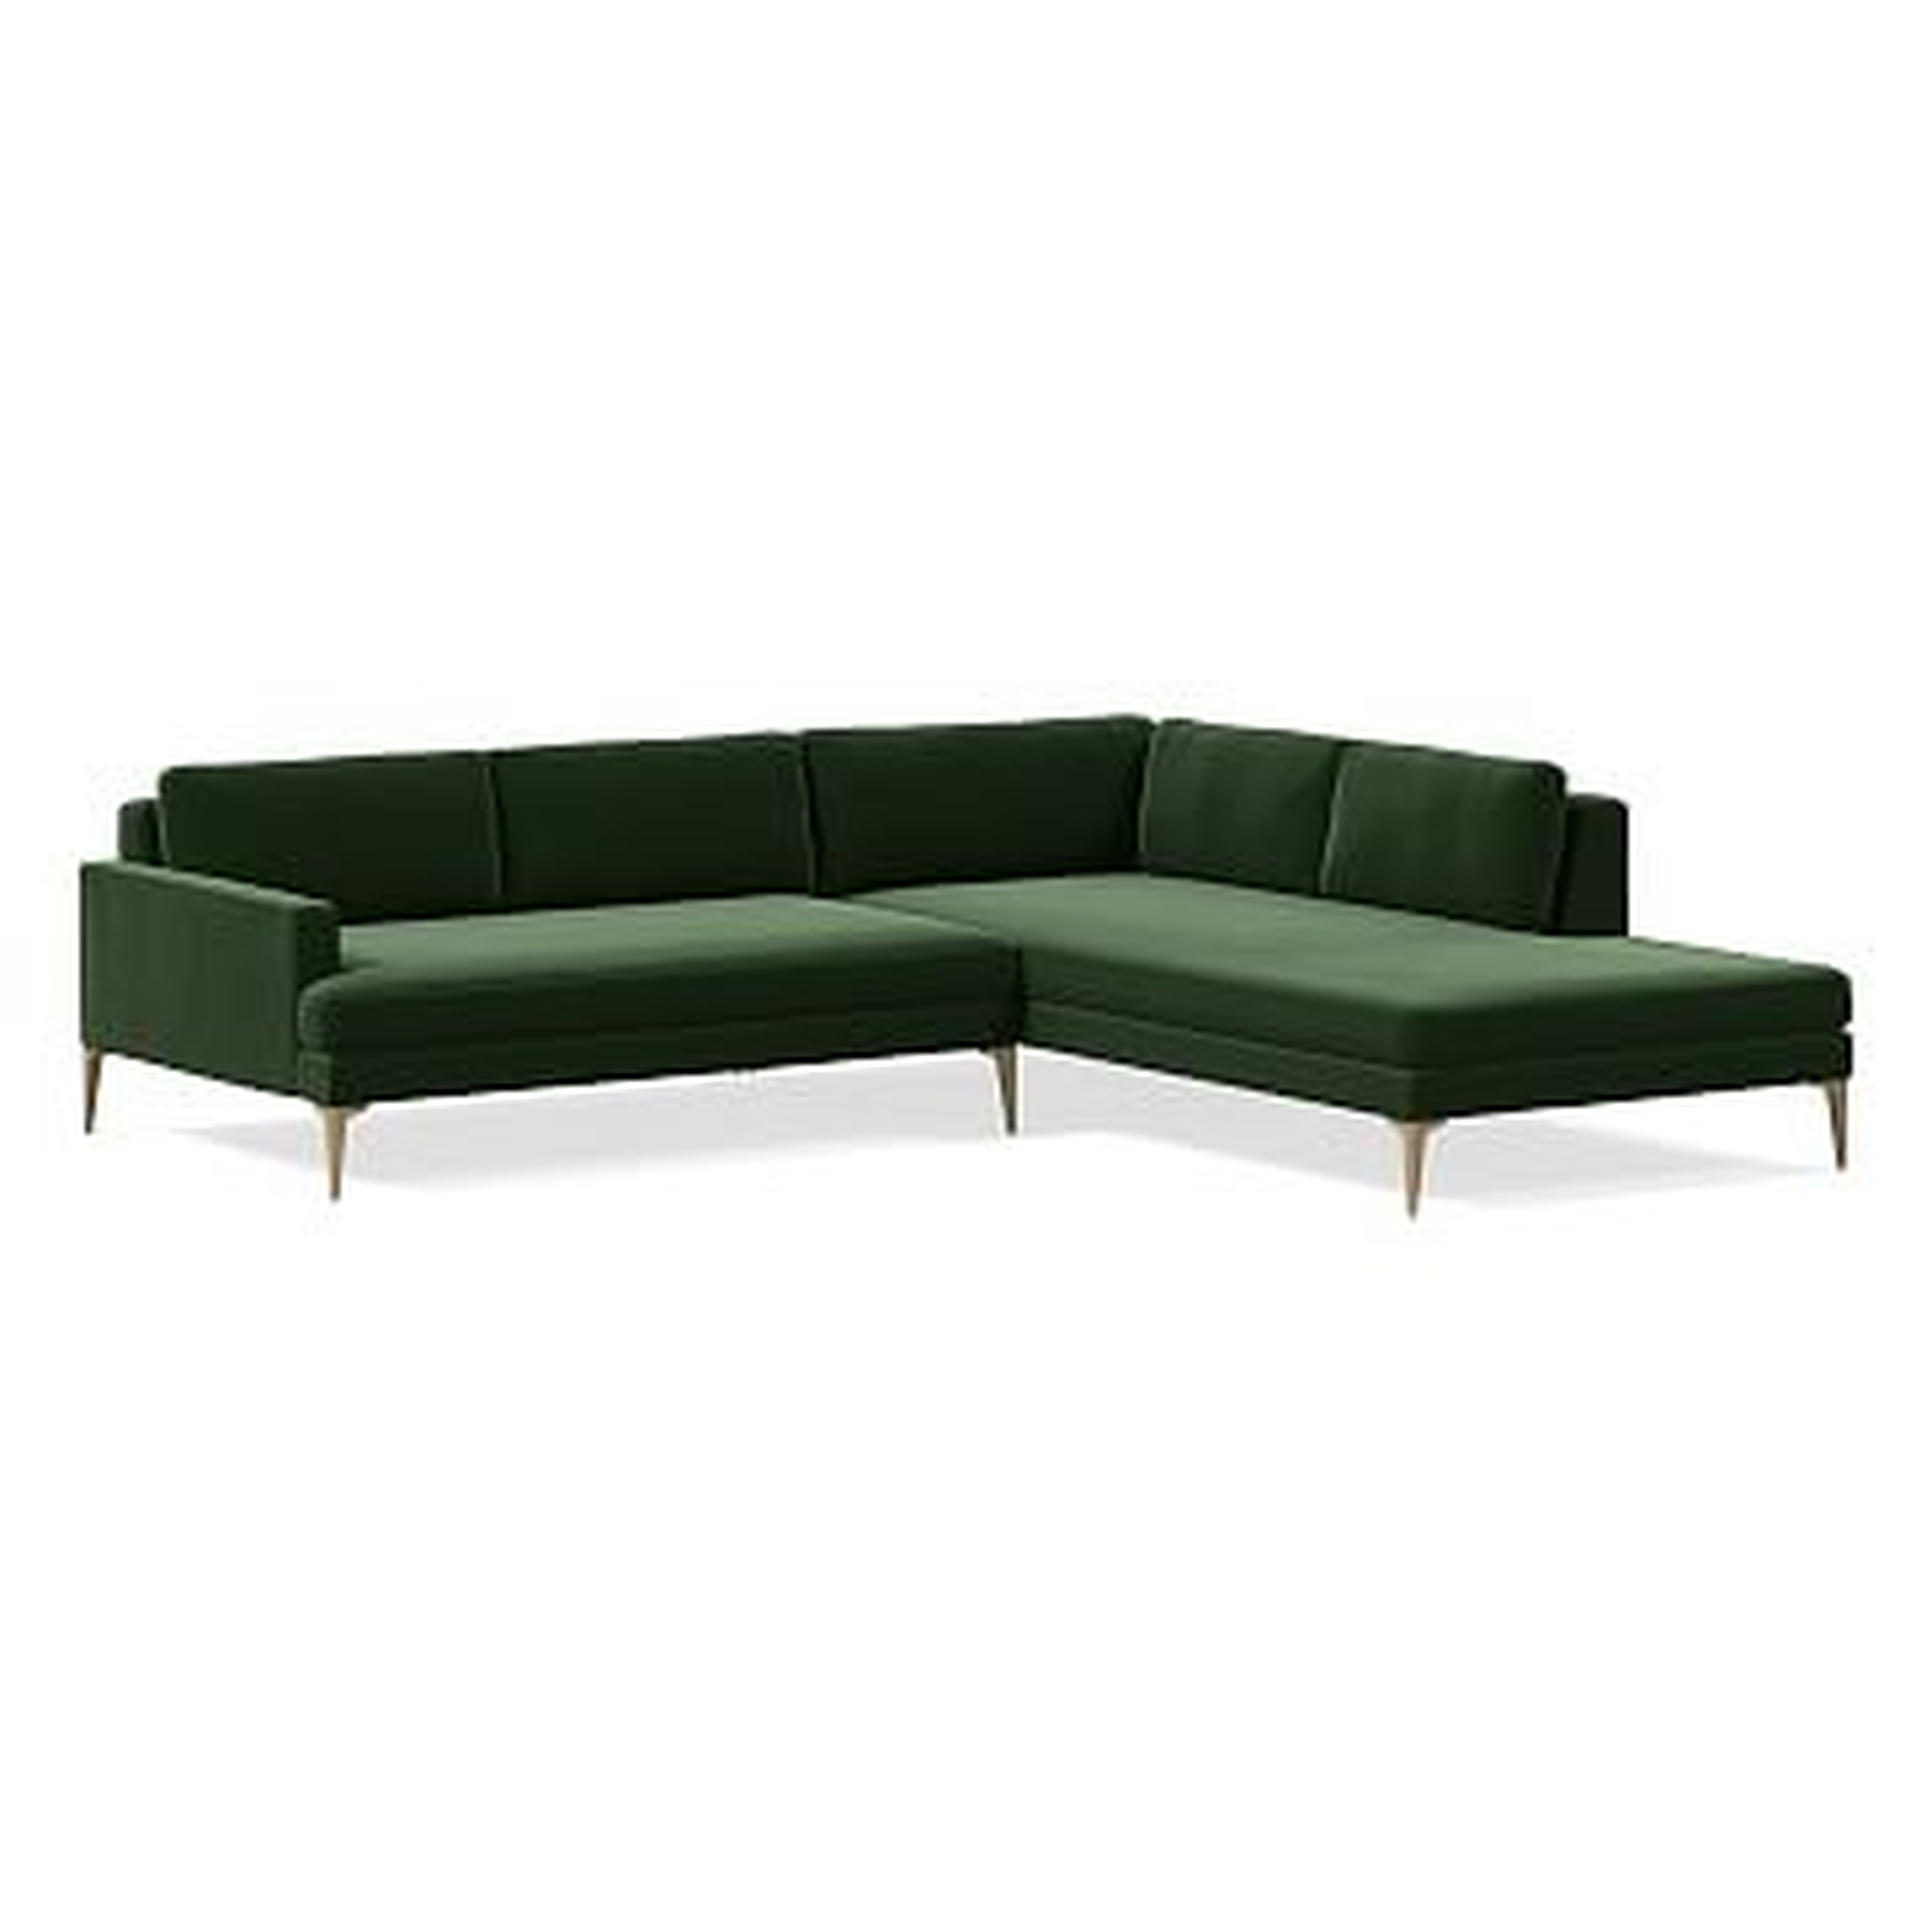 Andes Sectional Set 33: XL Left Arm 2.5 Seater Sofa, XL Right Arm Terminal Chaise, Performance Velvet, Moss, Blackened Brass - West Elm